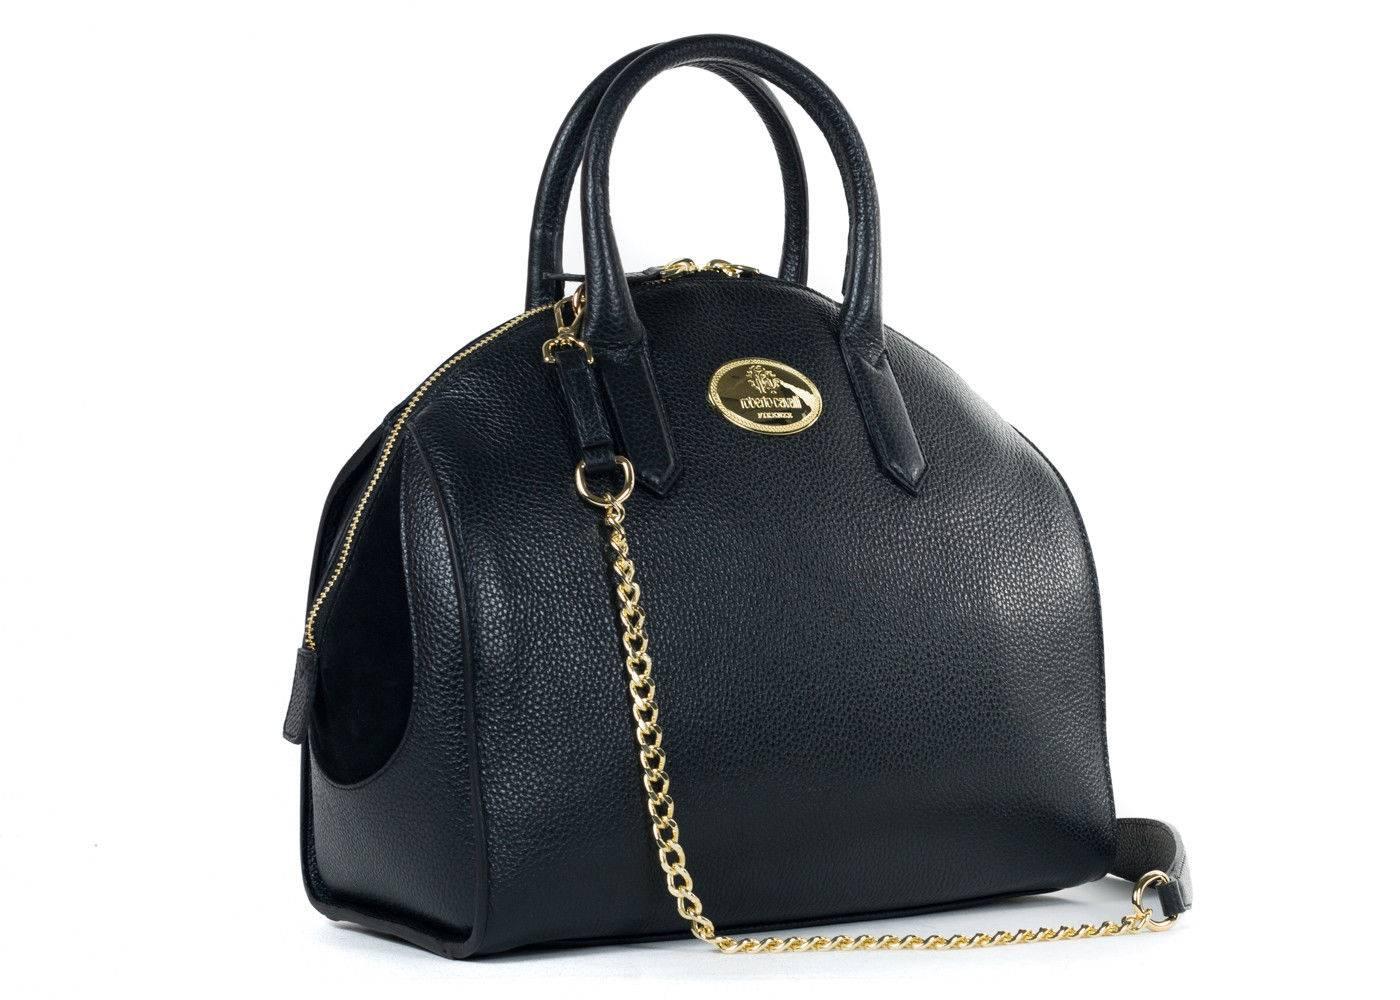 Brand New Roberto Cavalli Bowler Handbag
Original Tags & Dust Bag Included
Retails in Stores & Online for $1450
Considered as Large

Roberto Cavalli's Bowler is ideal for the modern traveling woman. This bag features gold hardware, a classic zip